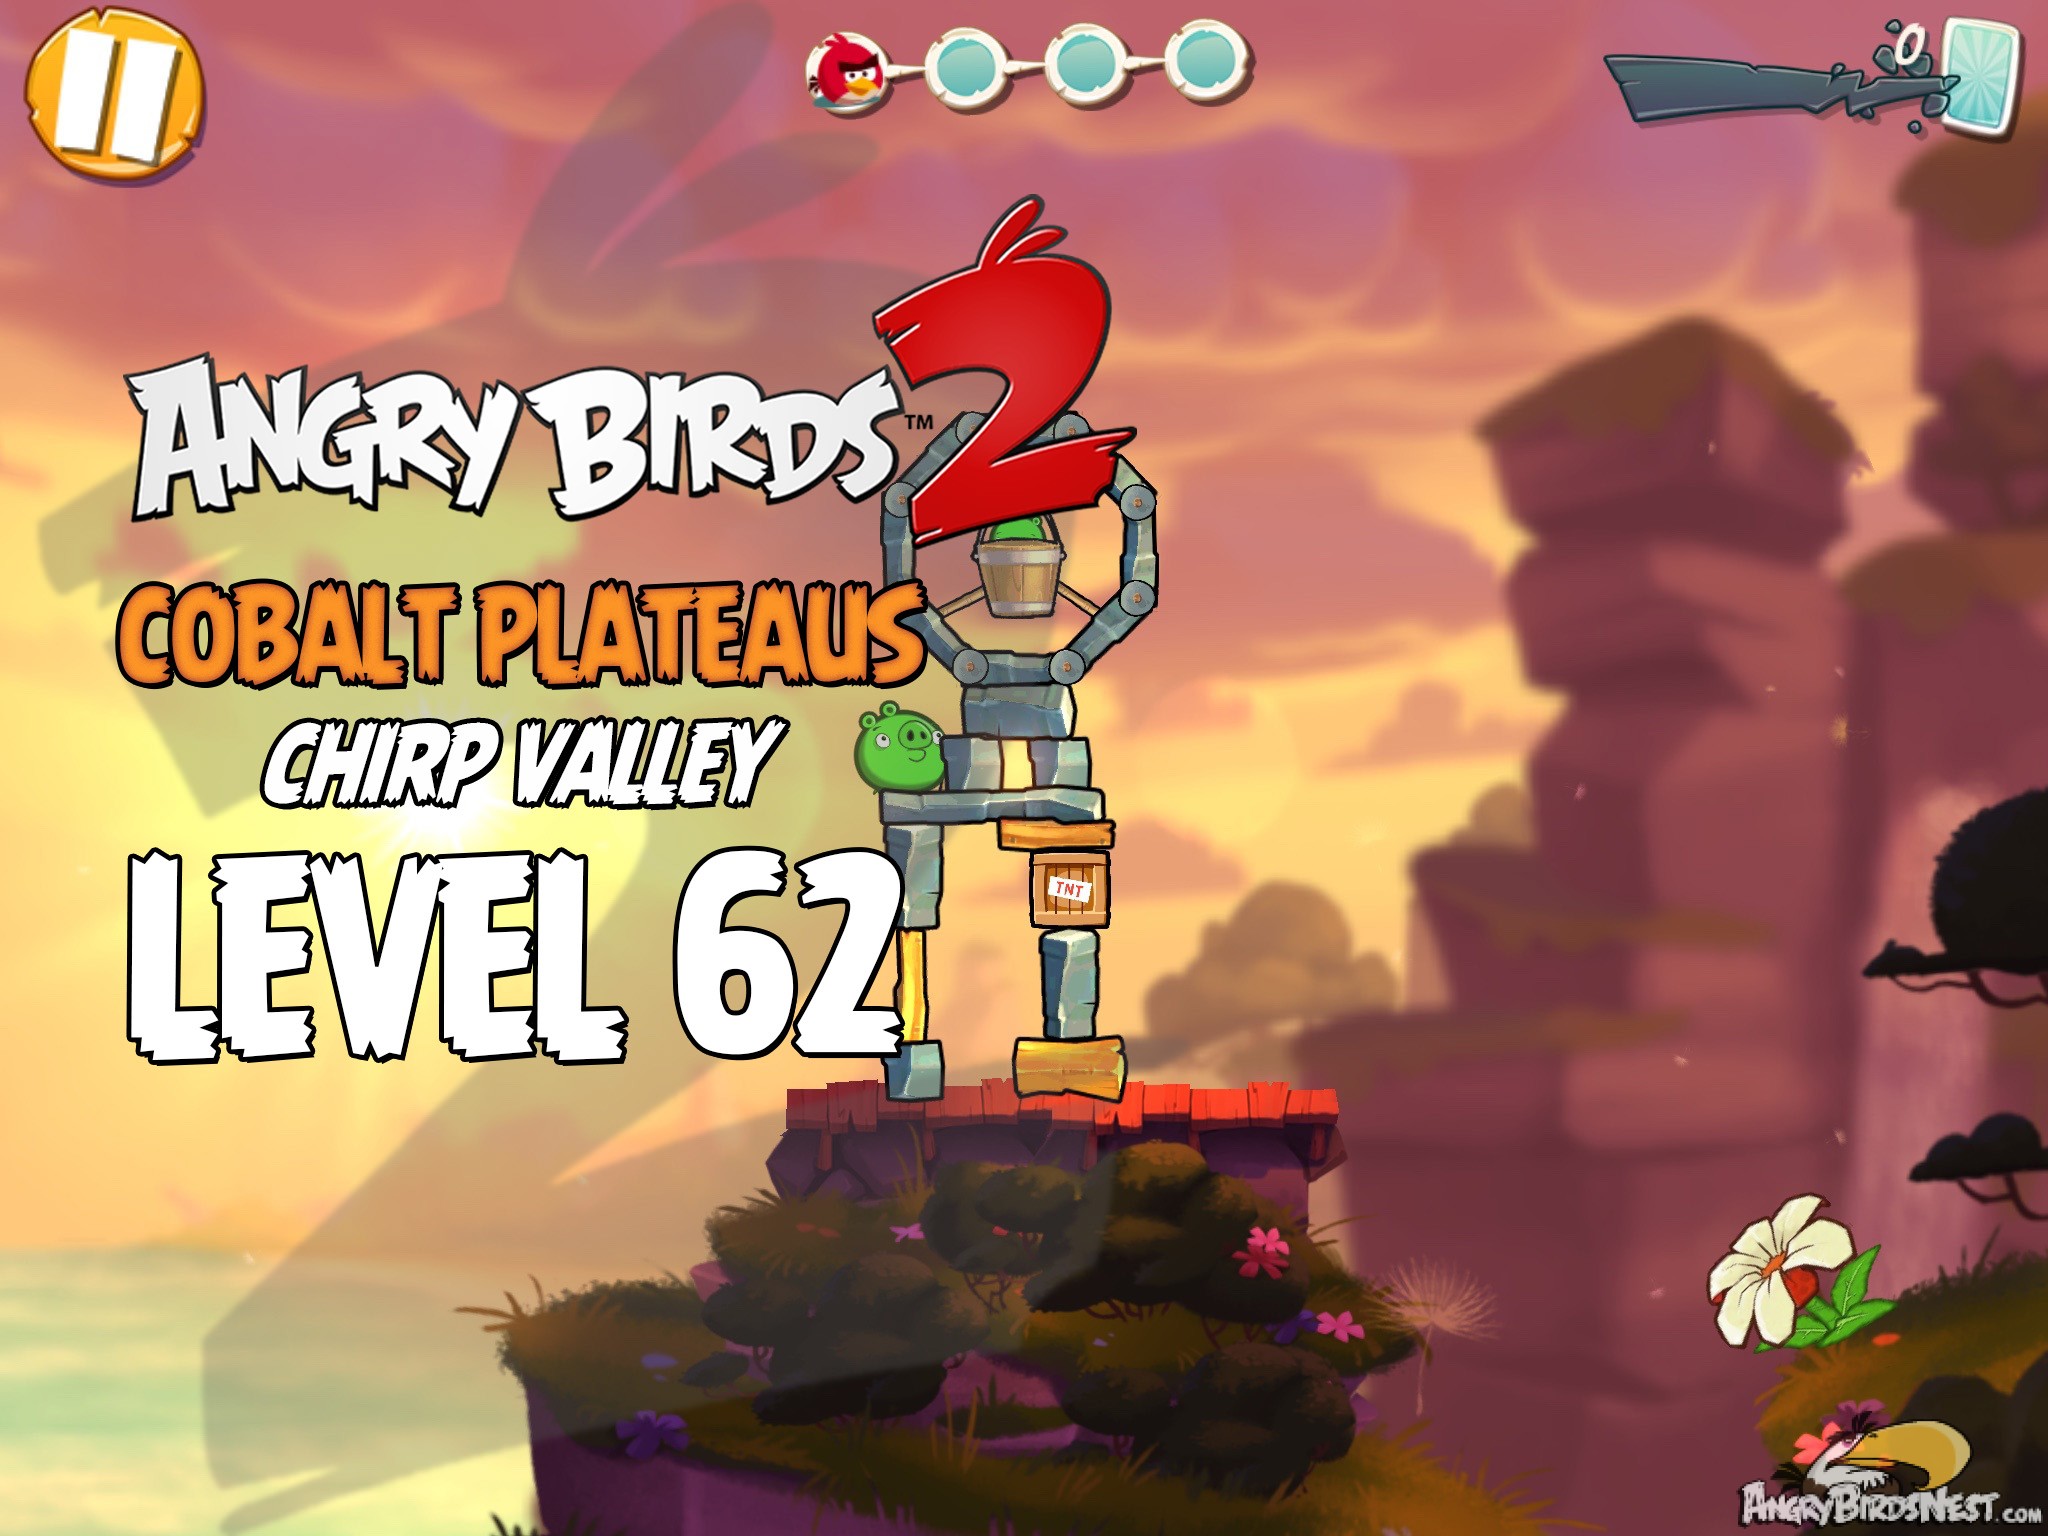 Angry Birds 2 Cobalt Plateaus Chirp Valley Level 62